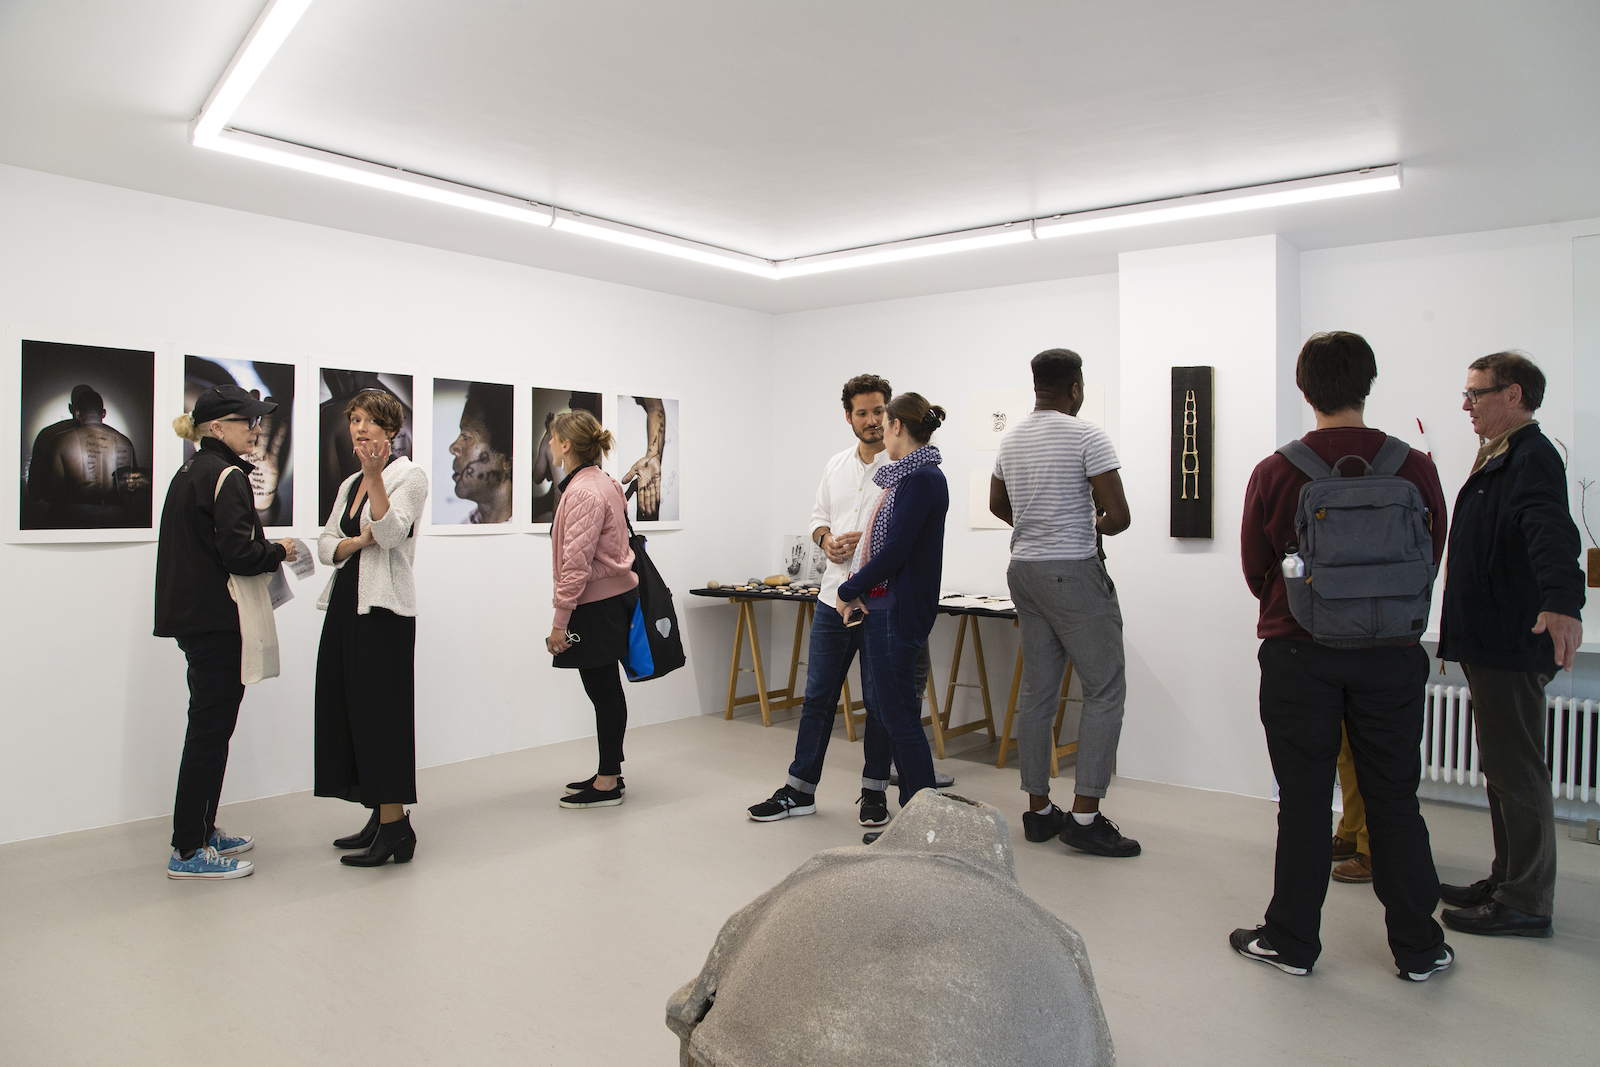 The exhibition of Luis Carlos Tovar in June, 2019 in Marais / Photo by Maurine Tric